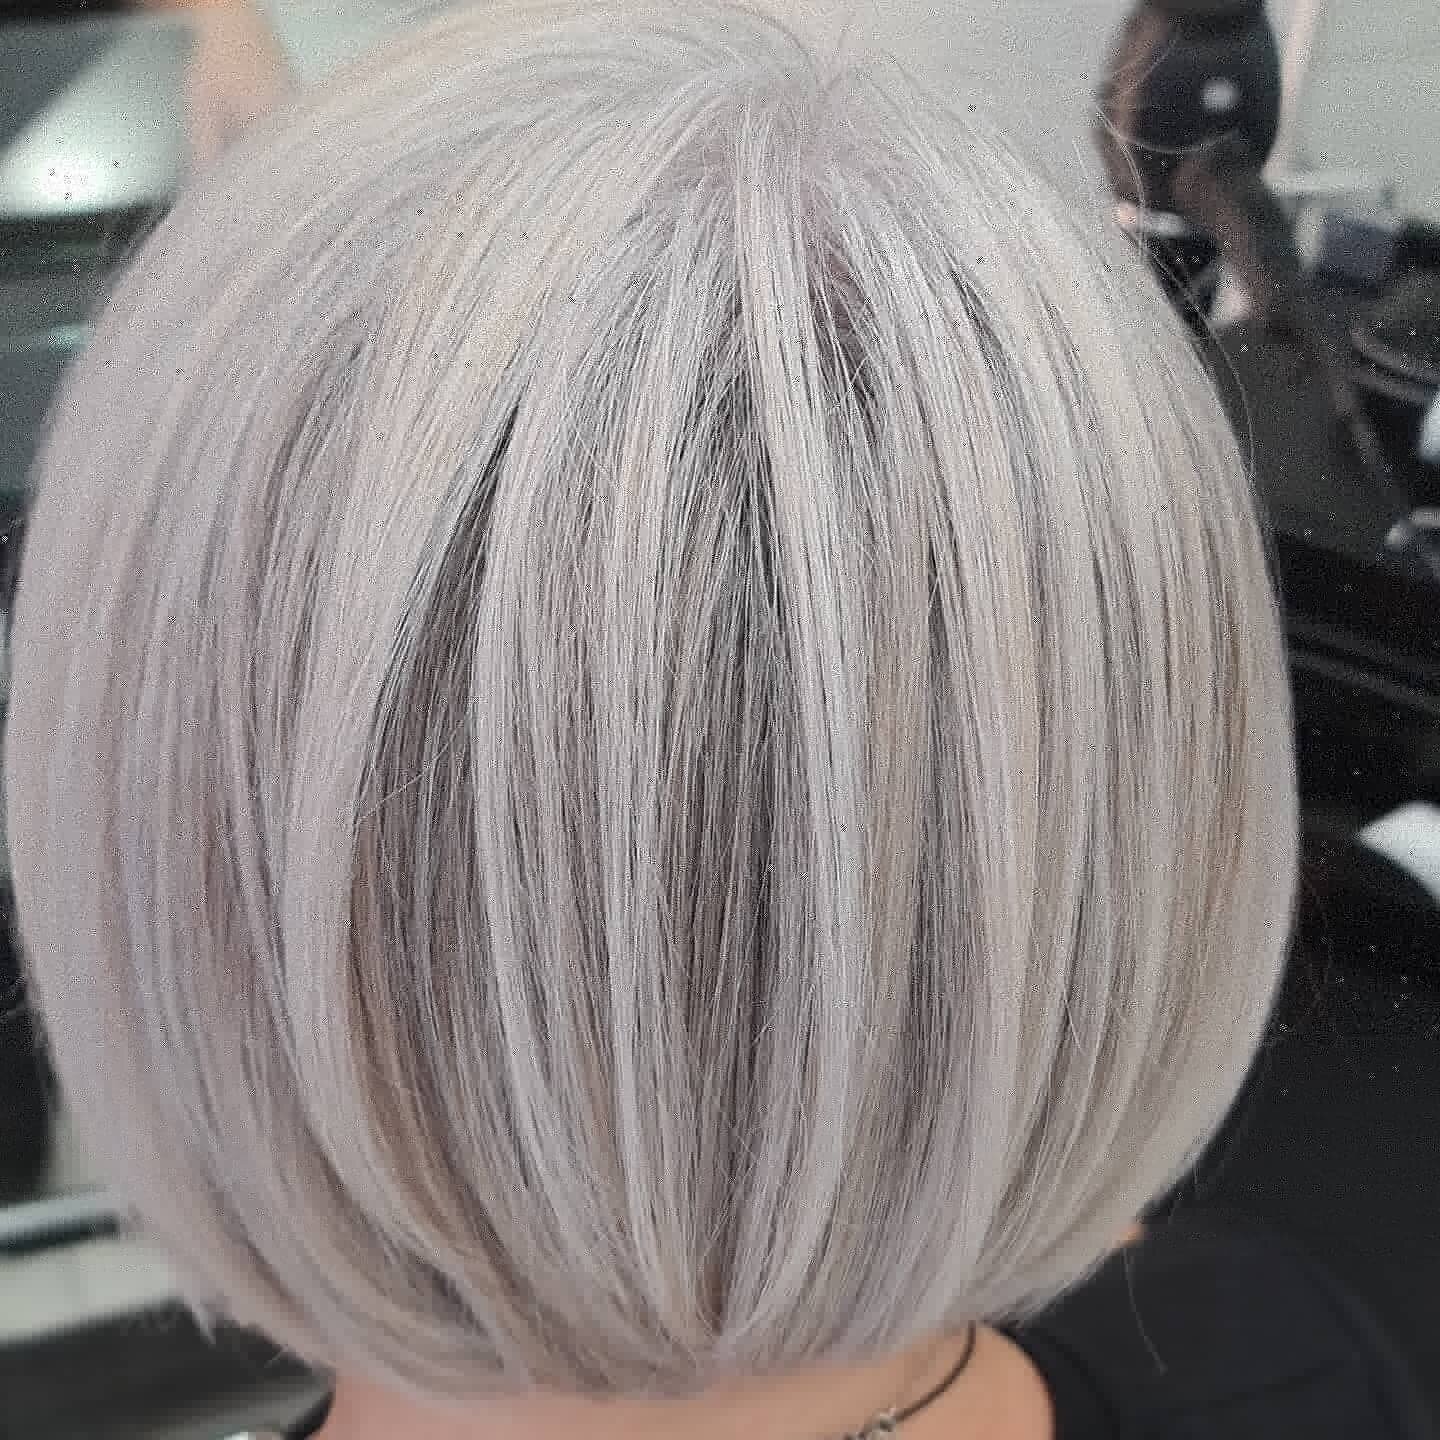 Absolute silver sensation!
Stunning icy tones creating cool, perfect, natural and  beautiful dimensions. 

Using @lorealpro #studioblonde and #dialight 9.01 the result a cool and icy blonde finish. 

Chopped and styled by @beatacastiel
Colour by @bea